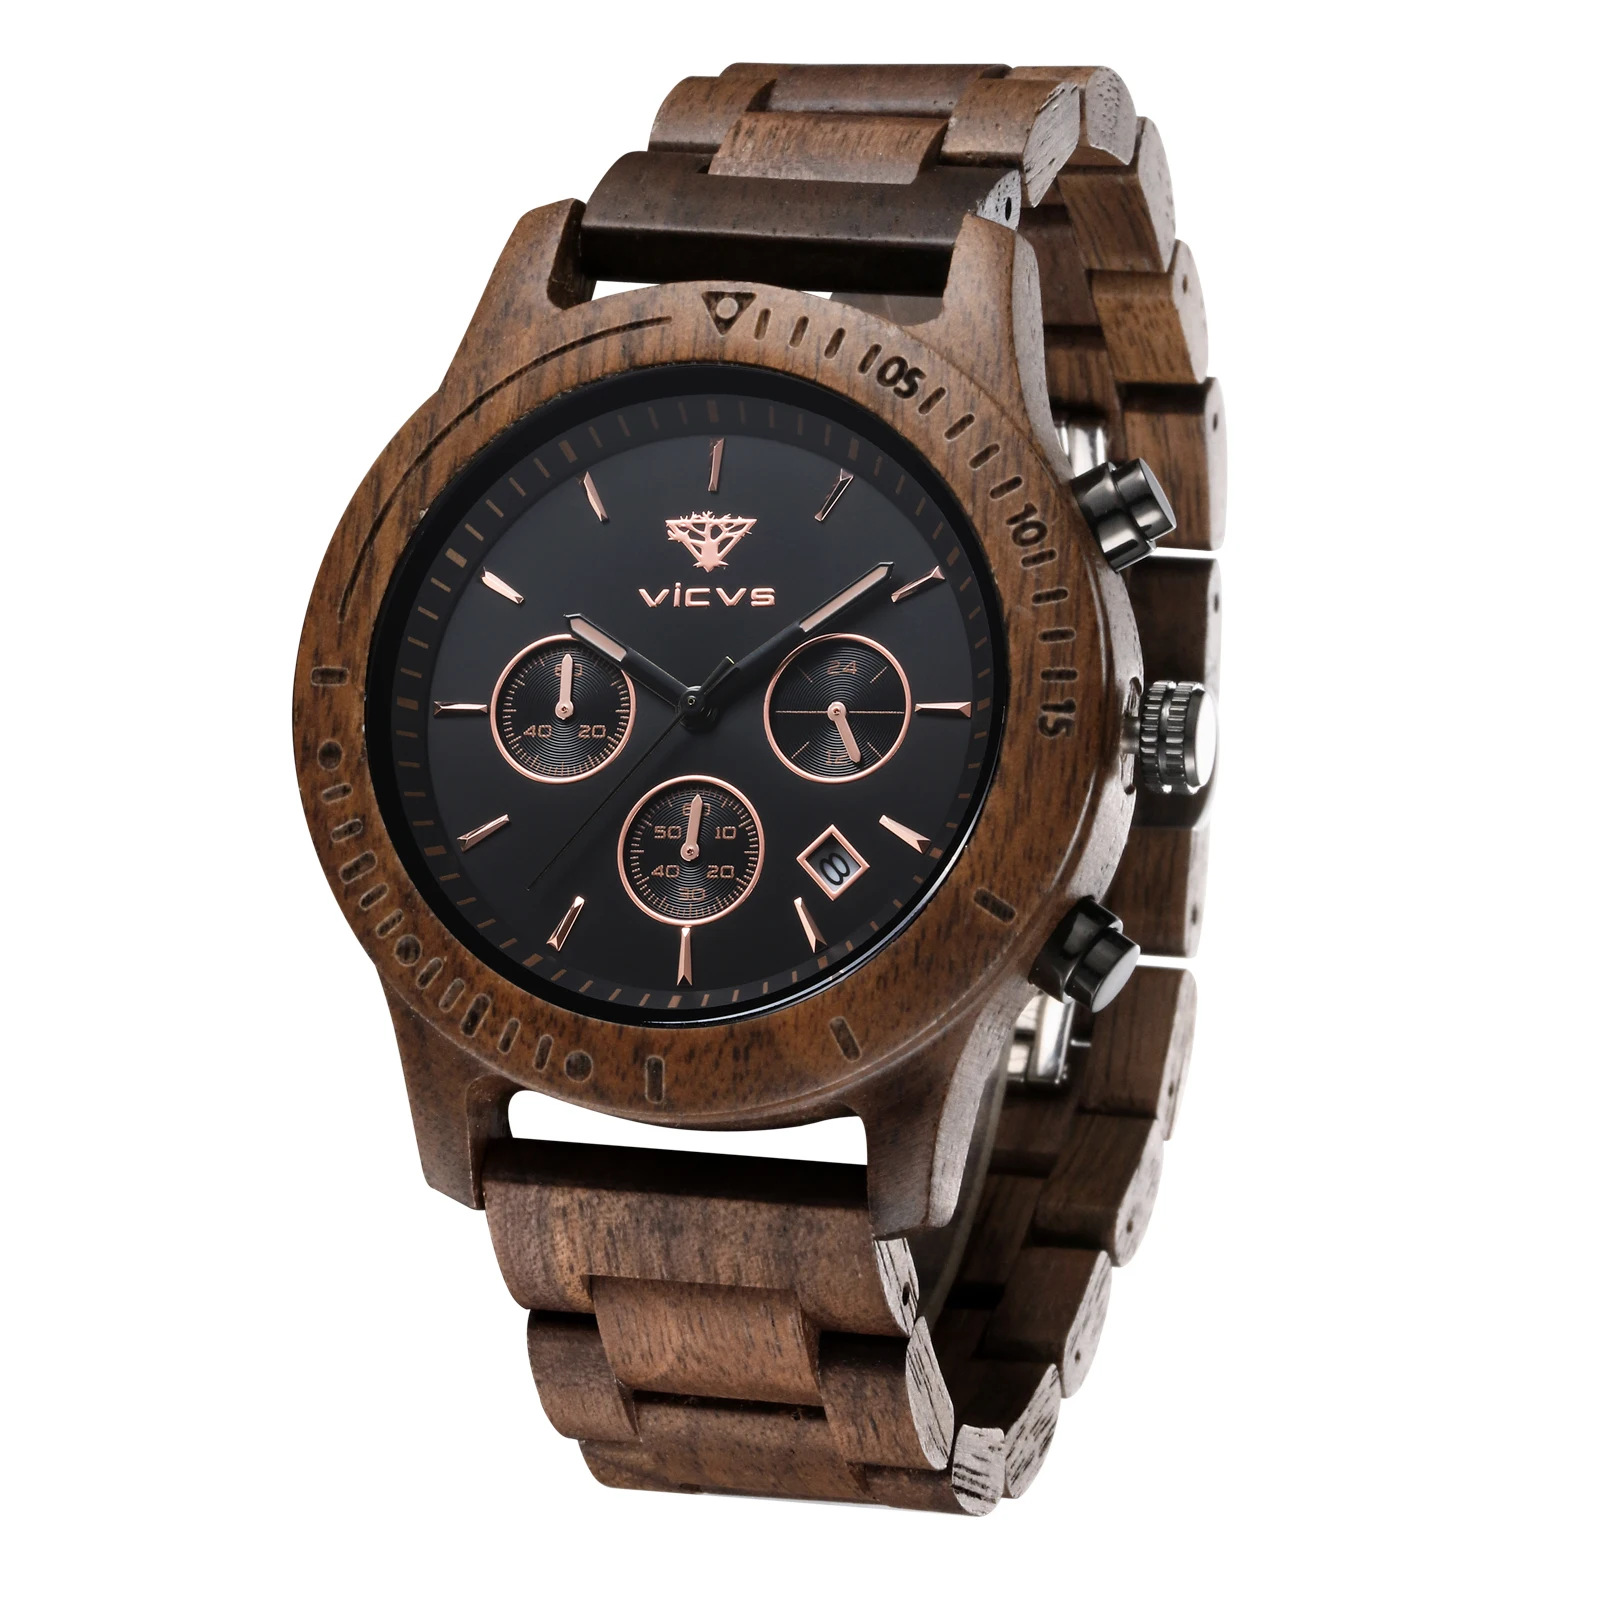 watches mens 2021 Wood Watches Week Display Date High Quality Quartz Male Watches Dropshipping watch for men enlarge